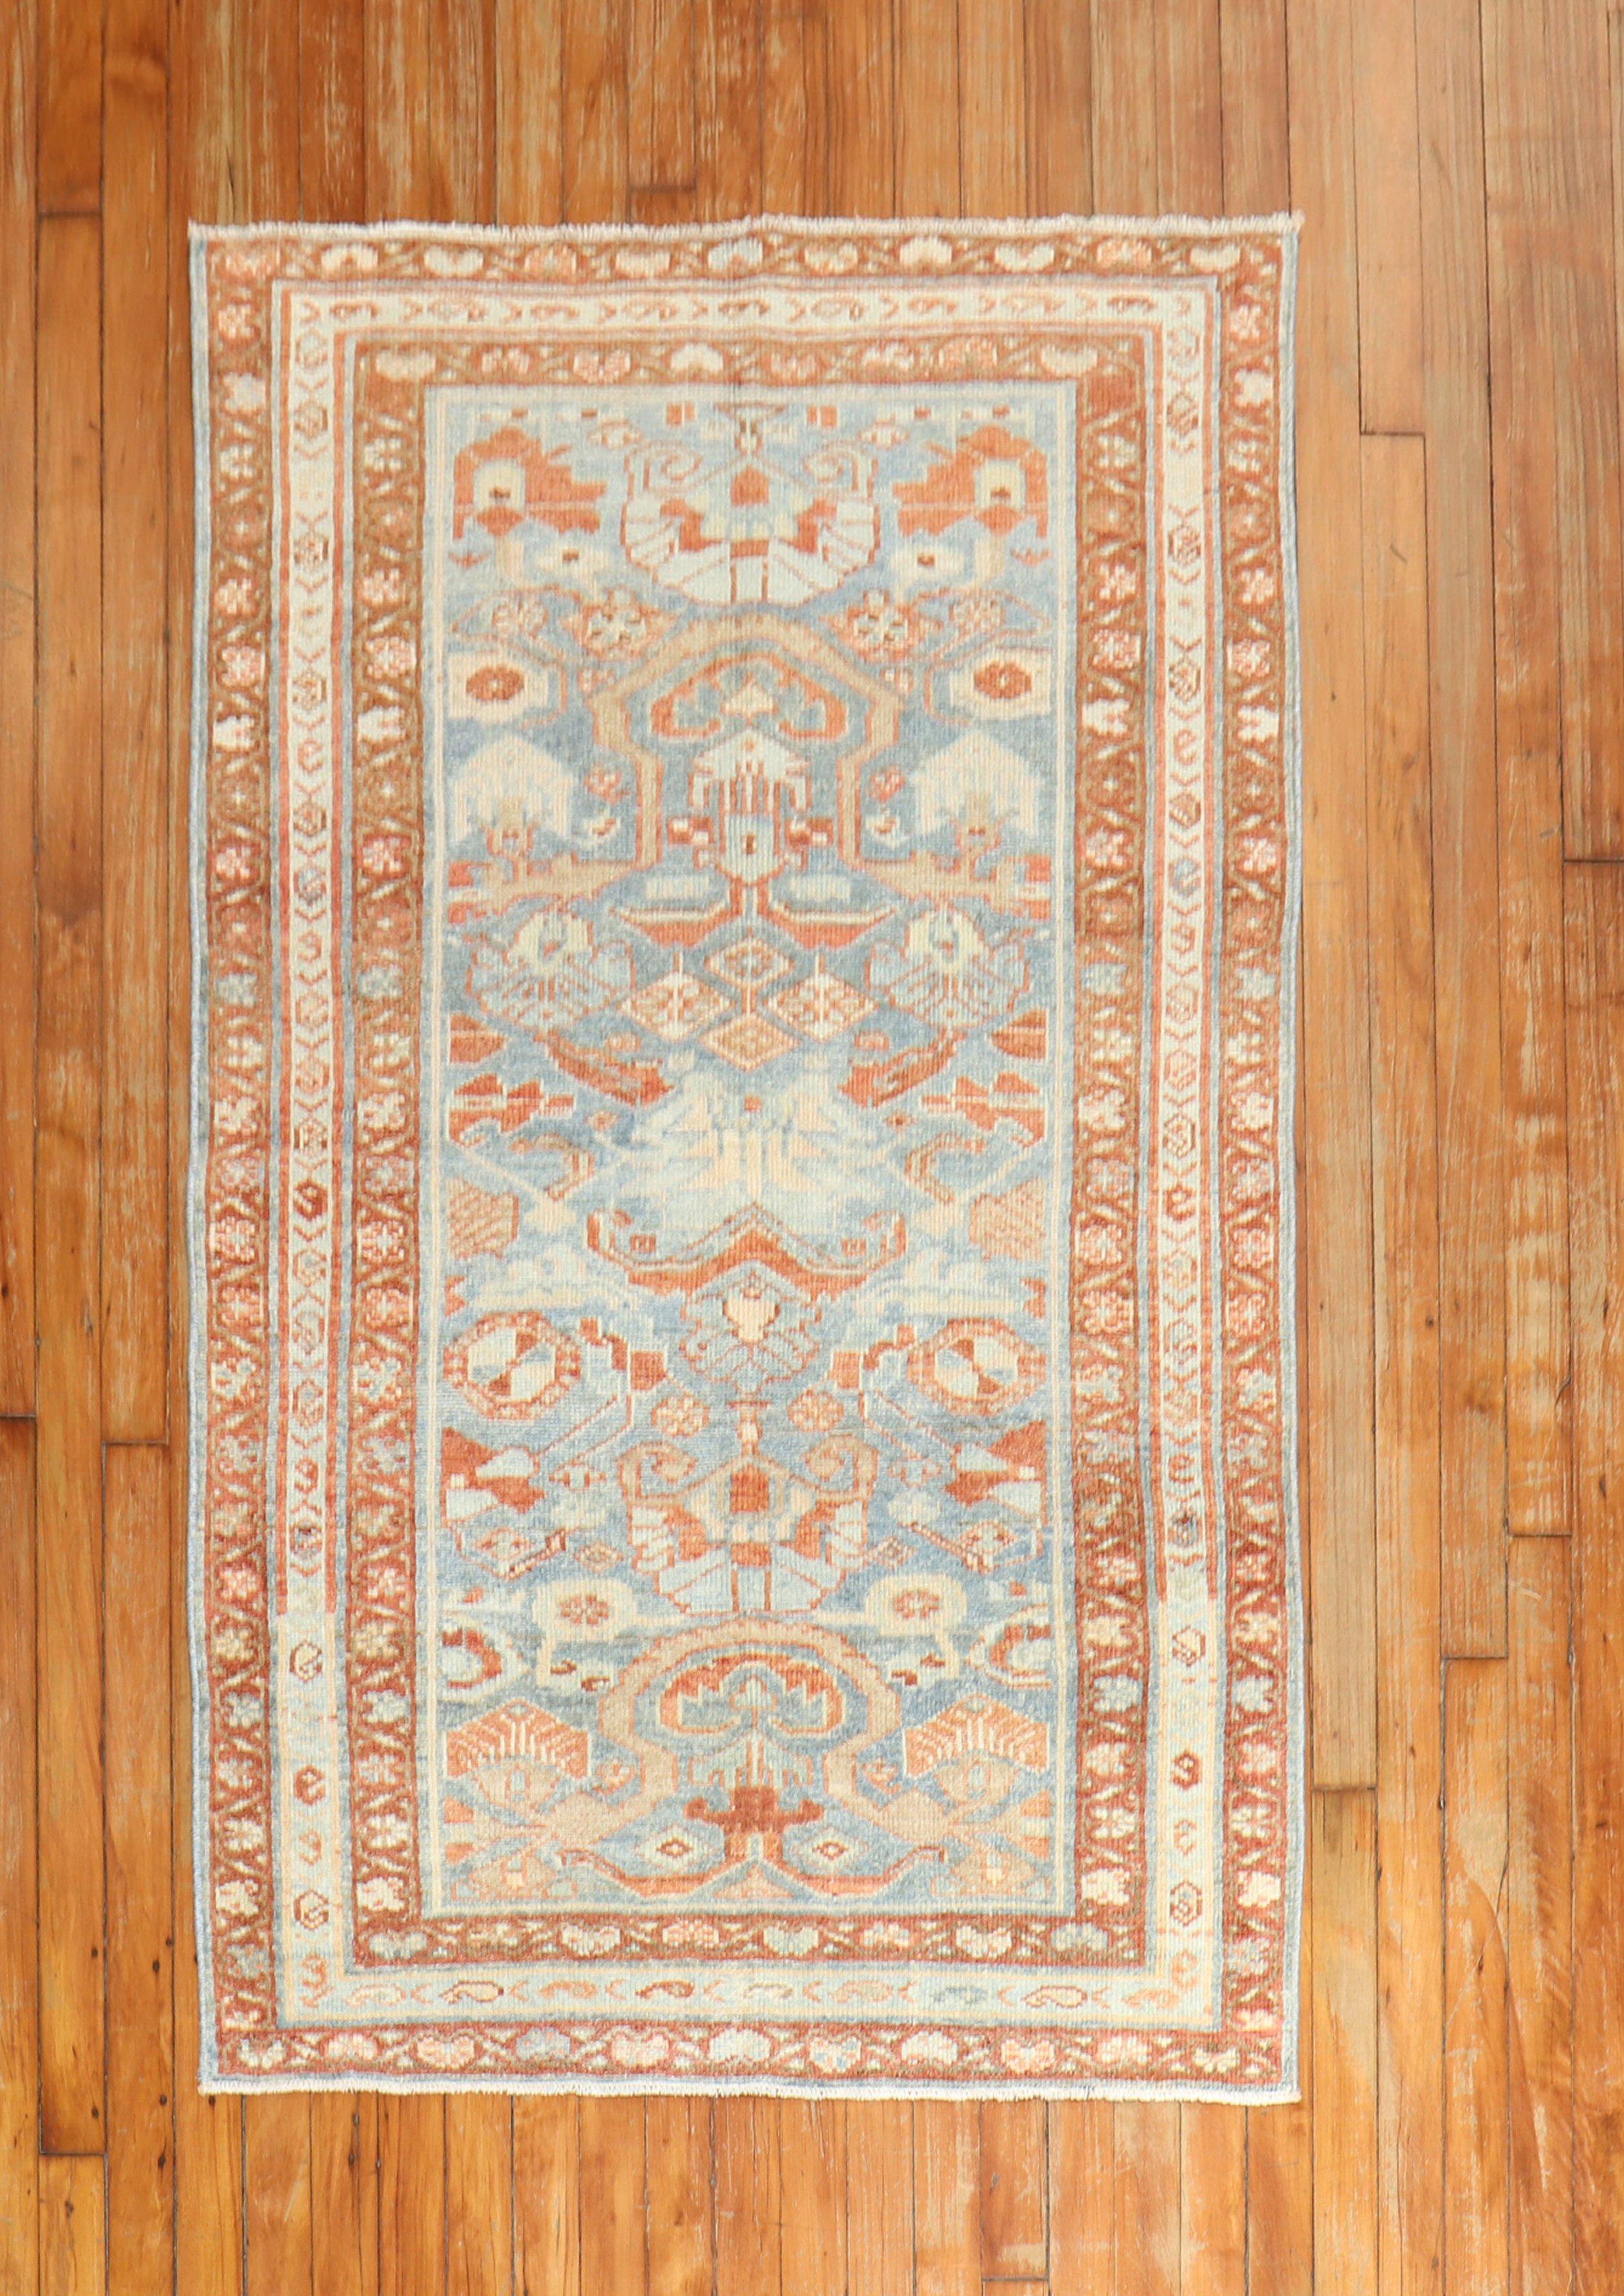 An antique Persian Malayer scatter size rug from the 2nd quarter of the 20th century in blue, brown, and rust

Measures: 3'2” x 5'.